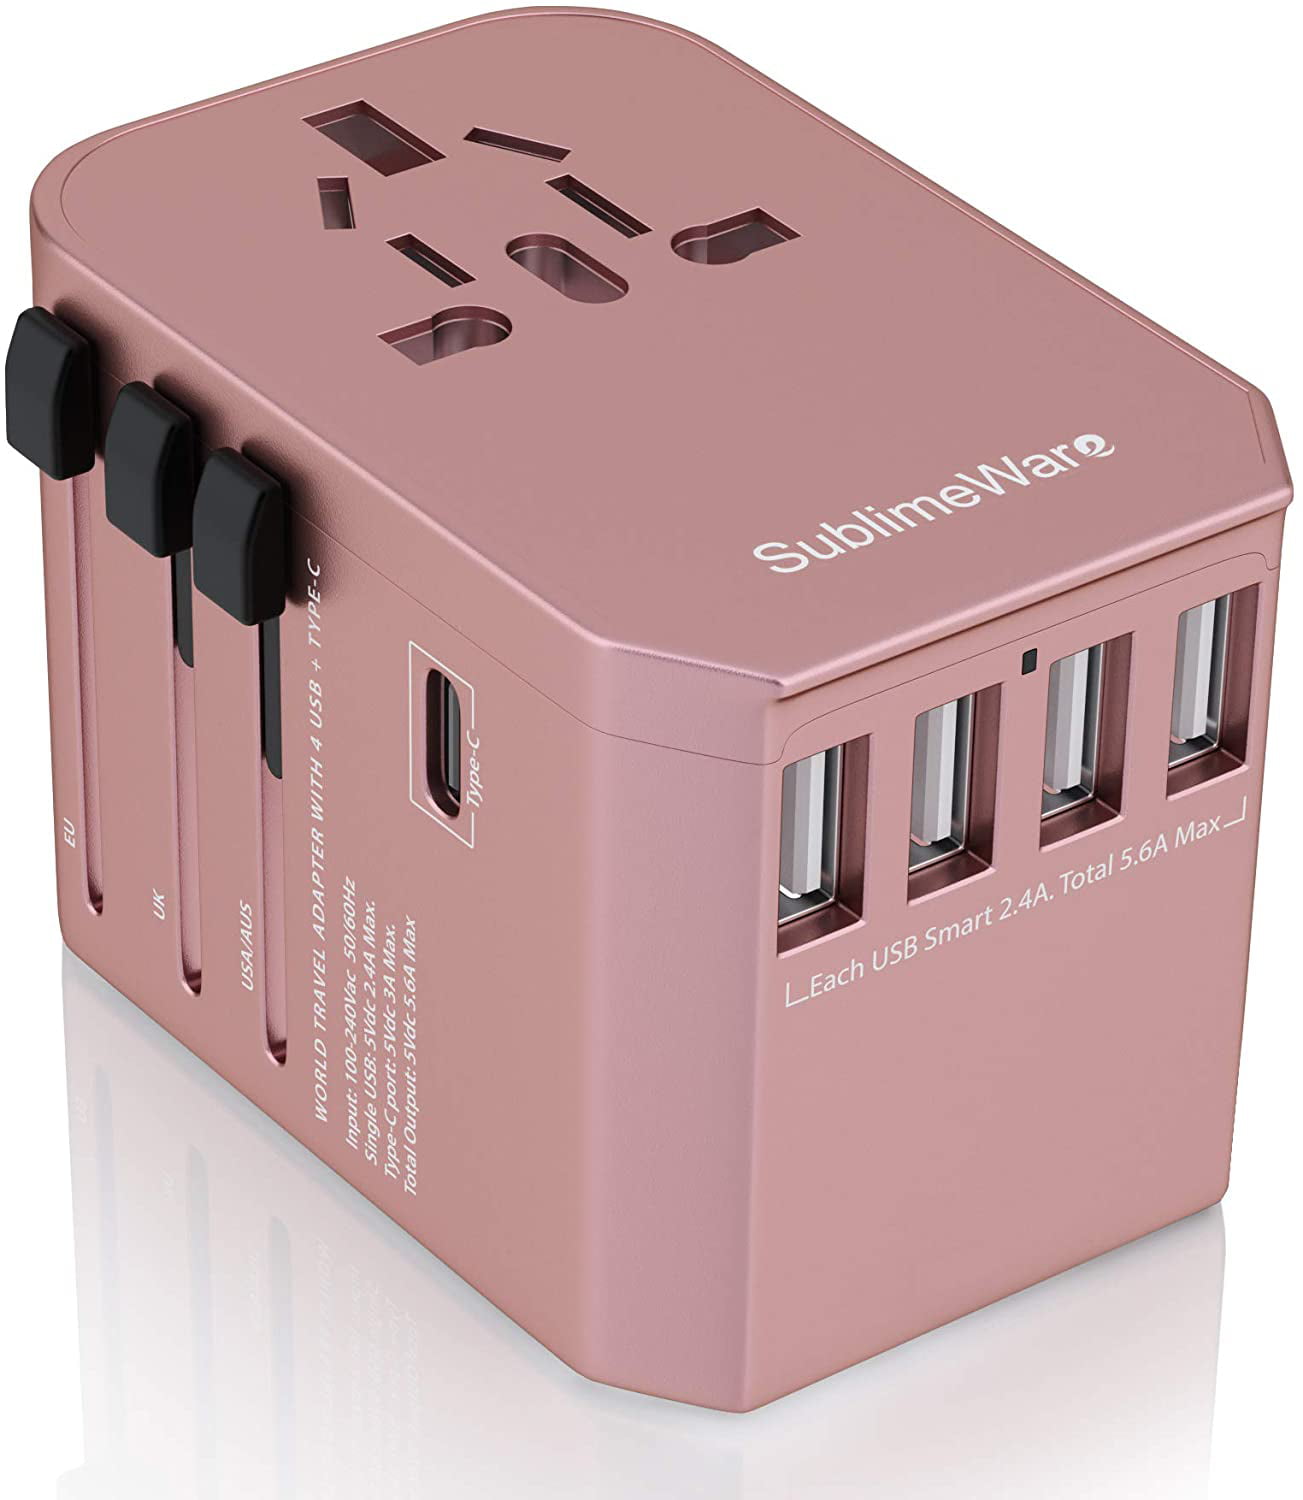 w/5 USB Ports and USB Type C Power Plug Adapter UK Japan China Europe Type C A G I A/C Travel Adapter 220 Volt Adapter International Travel - Work 150+ Countries 